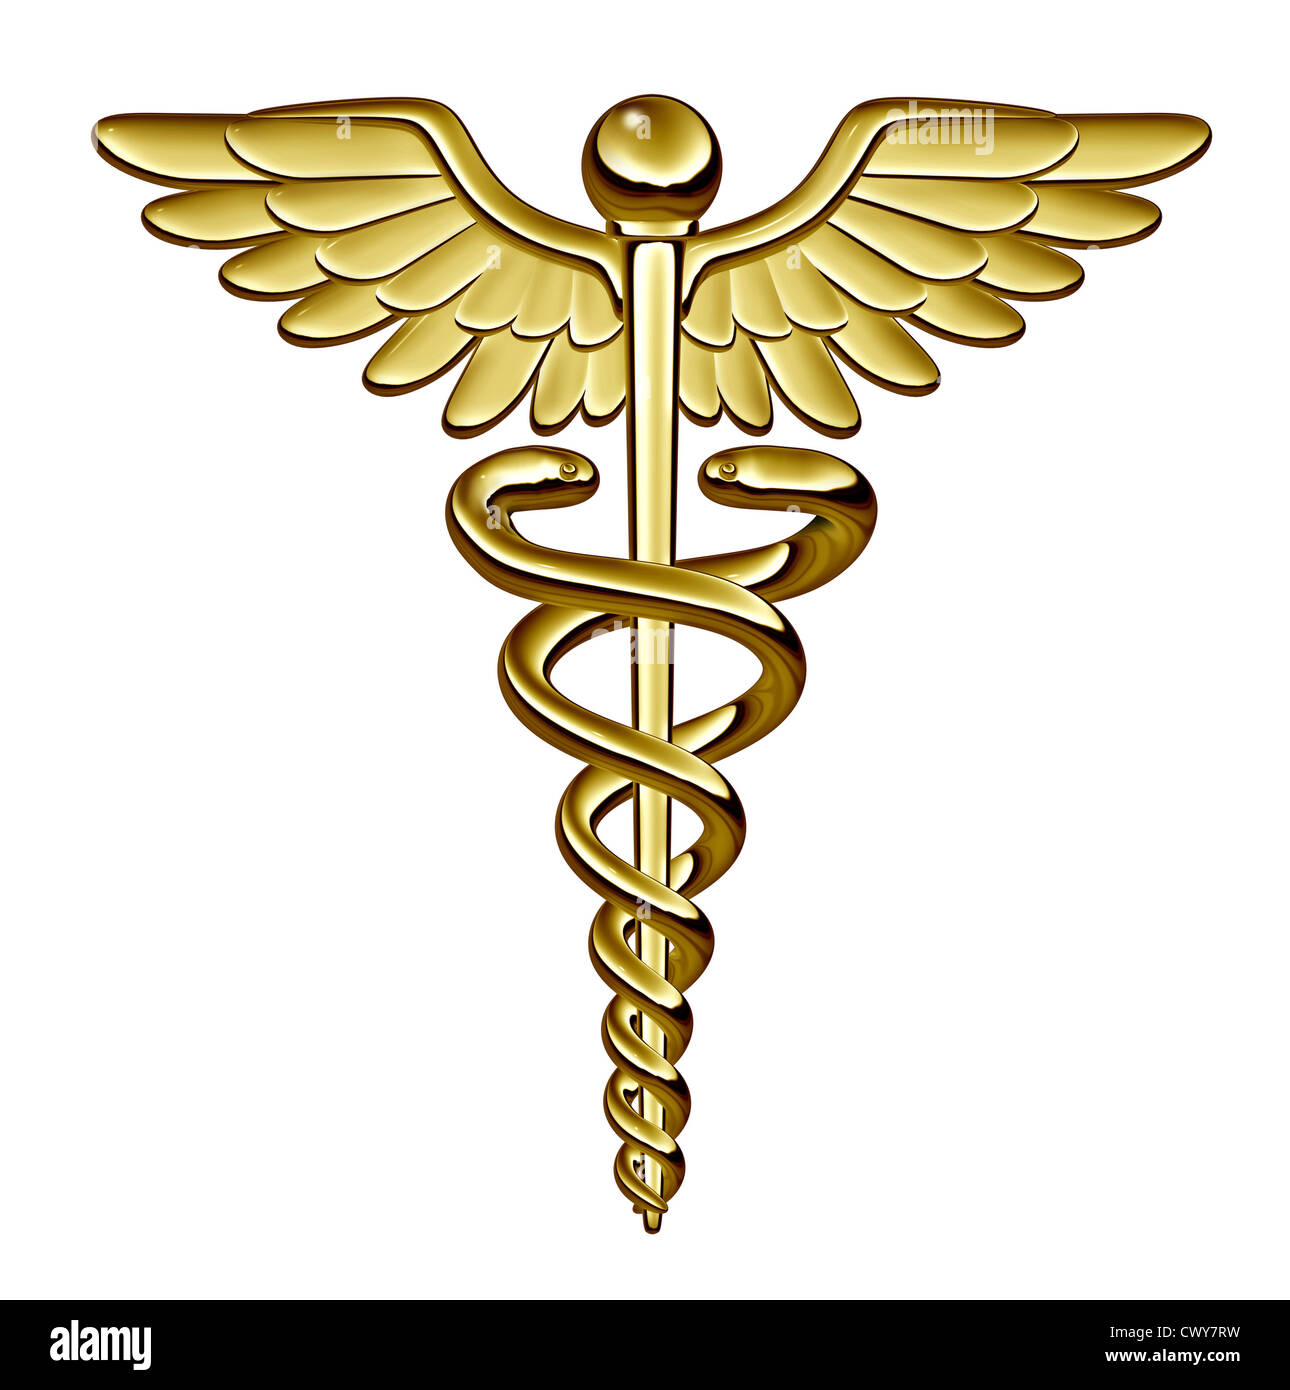 Caduceus medical symbol as a health care and medicine icon with snakes crawling on a pole with wings on golden metal texture isolated on a white background. Stock Photo